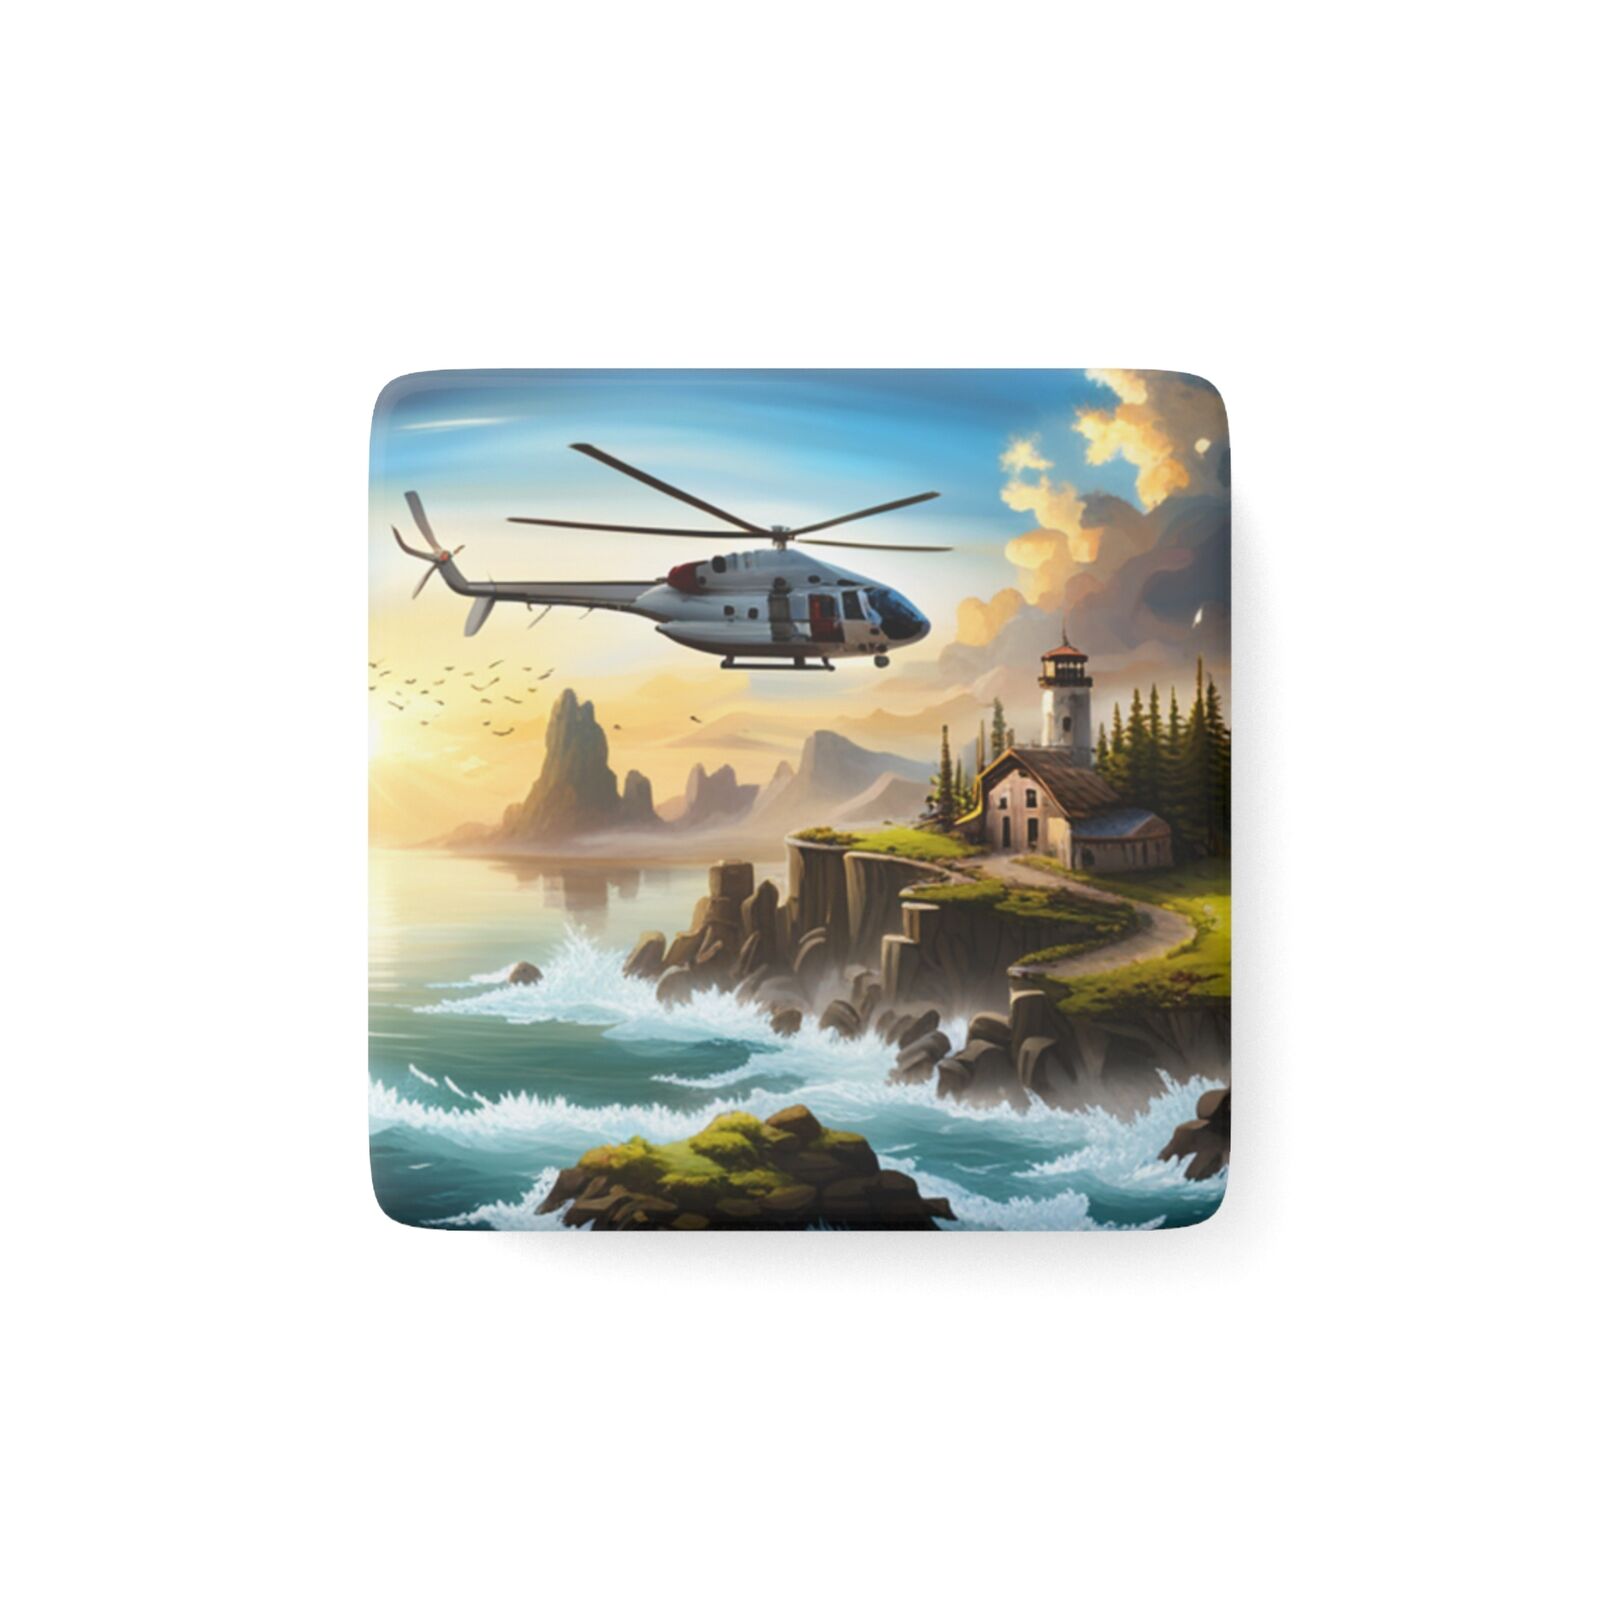 Helicopter 2 glossy strong Porcelain Magnet, Square